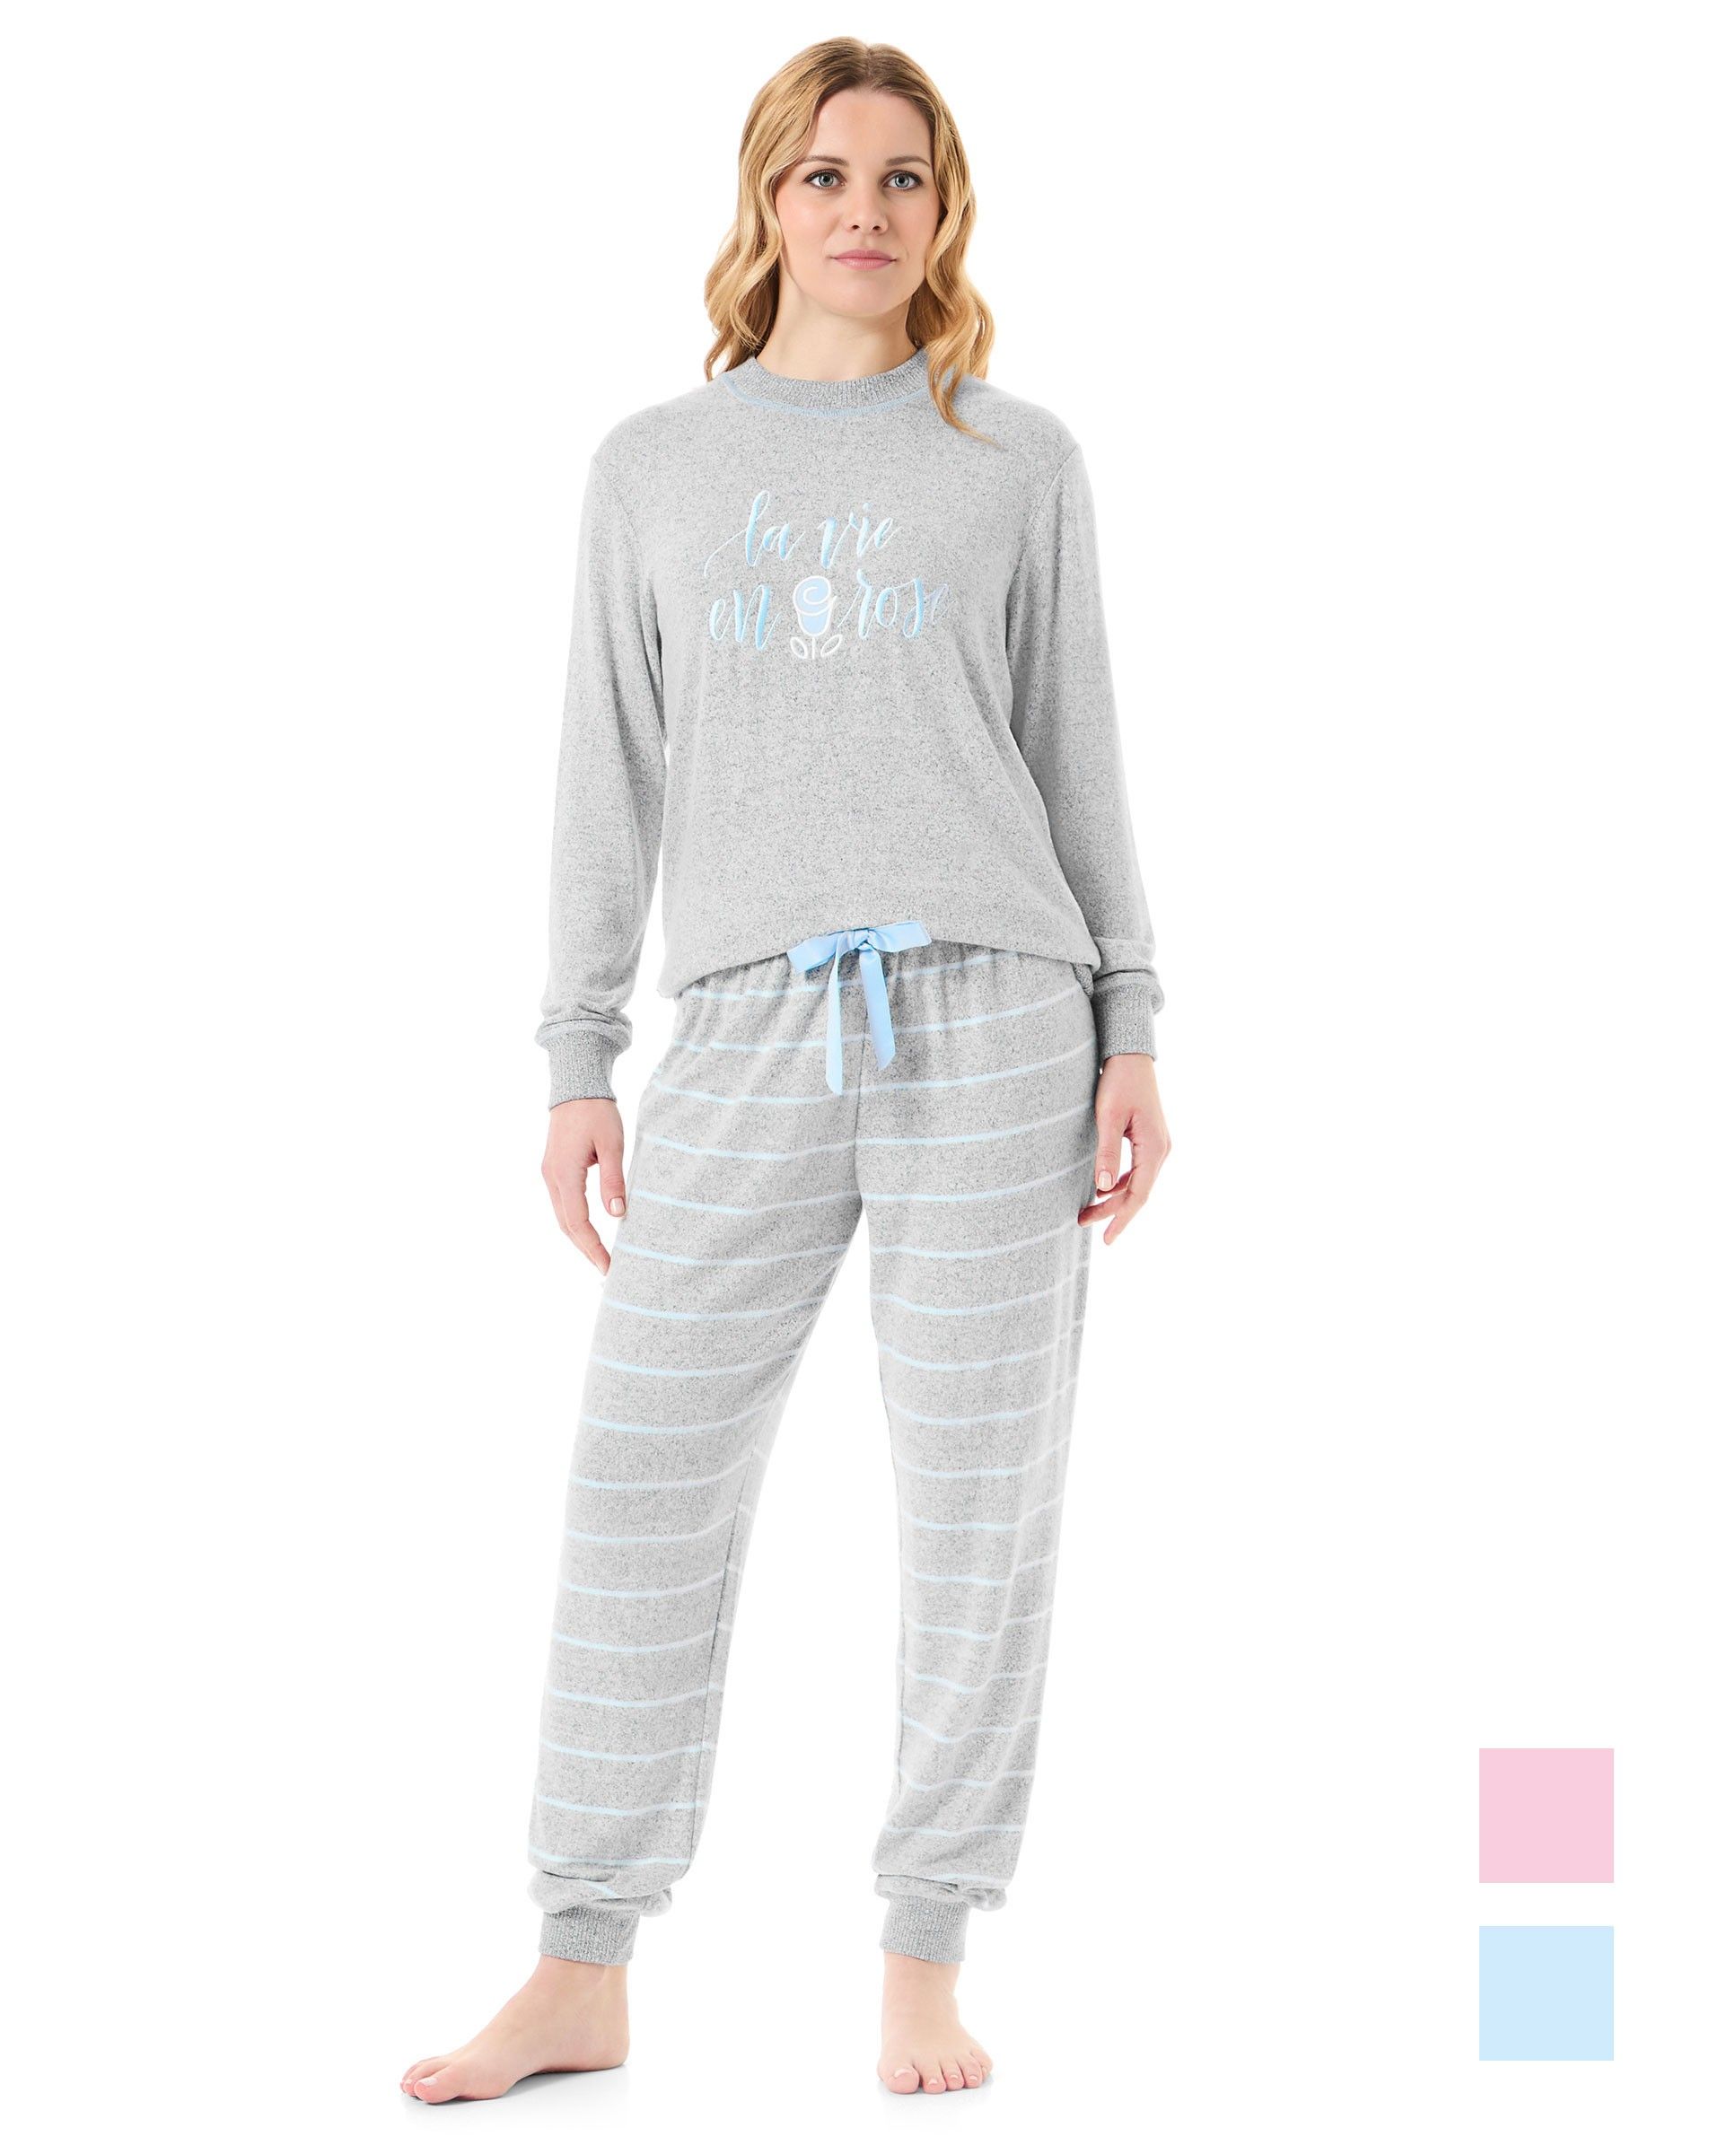 Women's long pyjamas, long sleeves, cuffs and round neck with striped long trousers